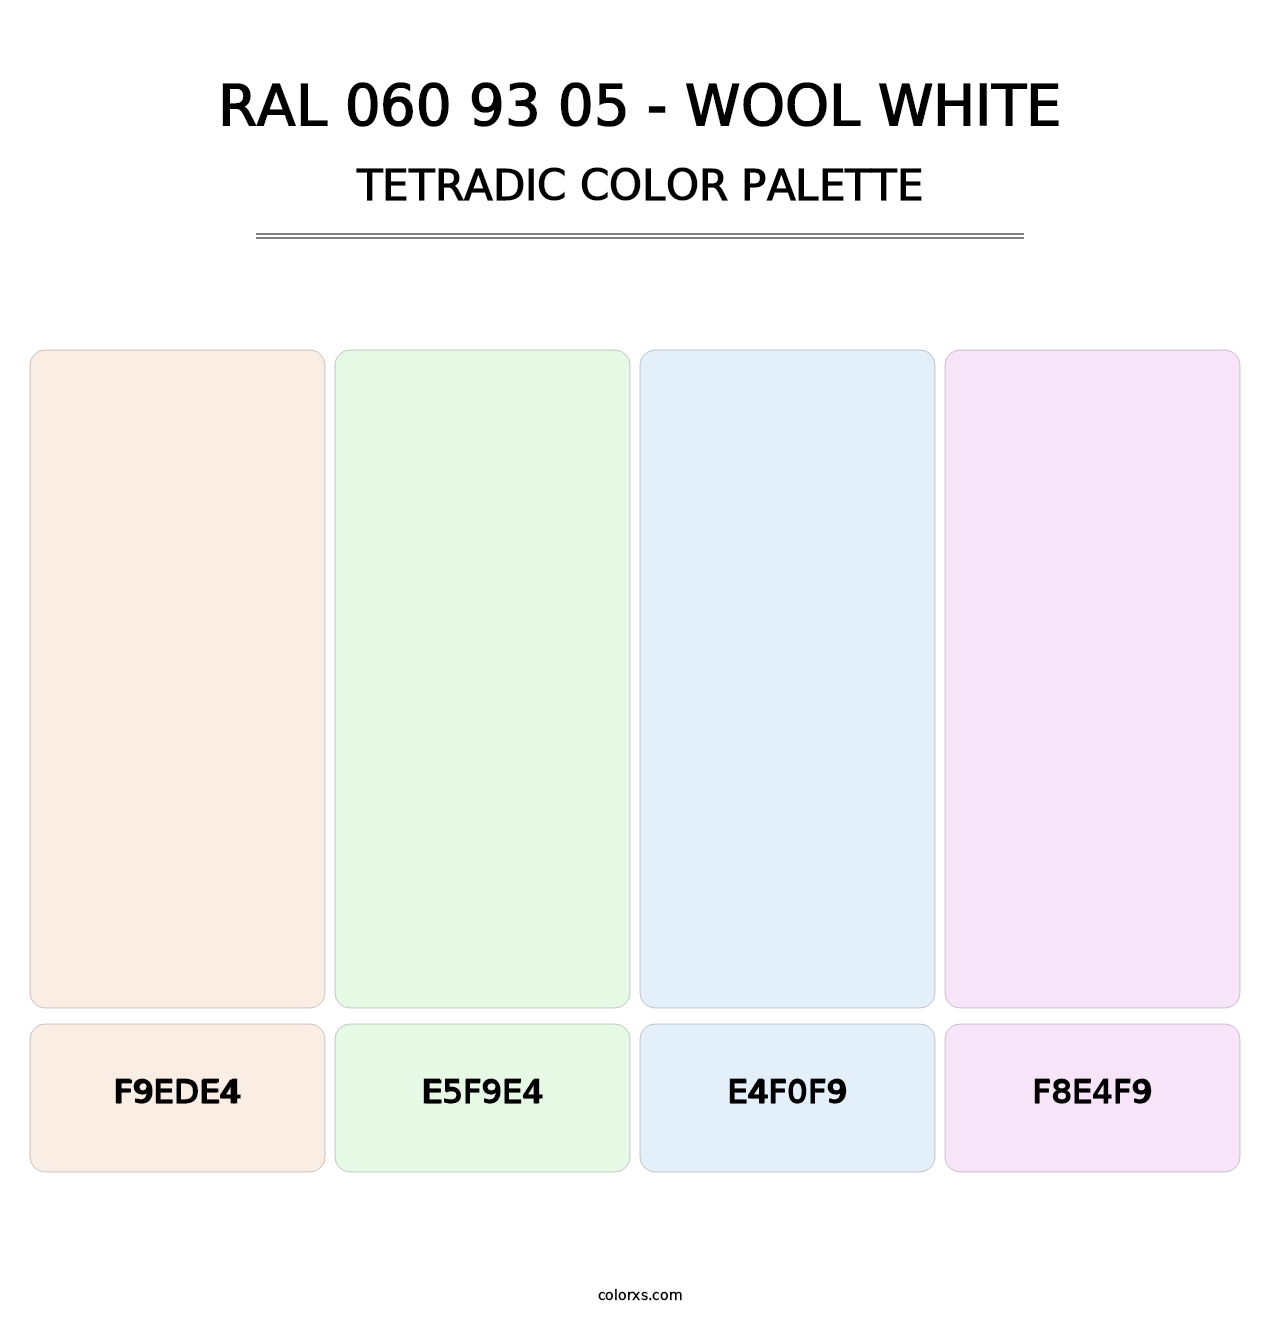 RAL 060 93 05 - Wool White - Tetradic Color Palette